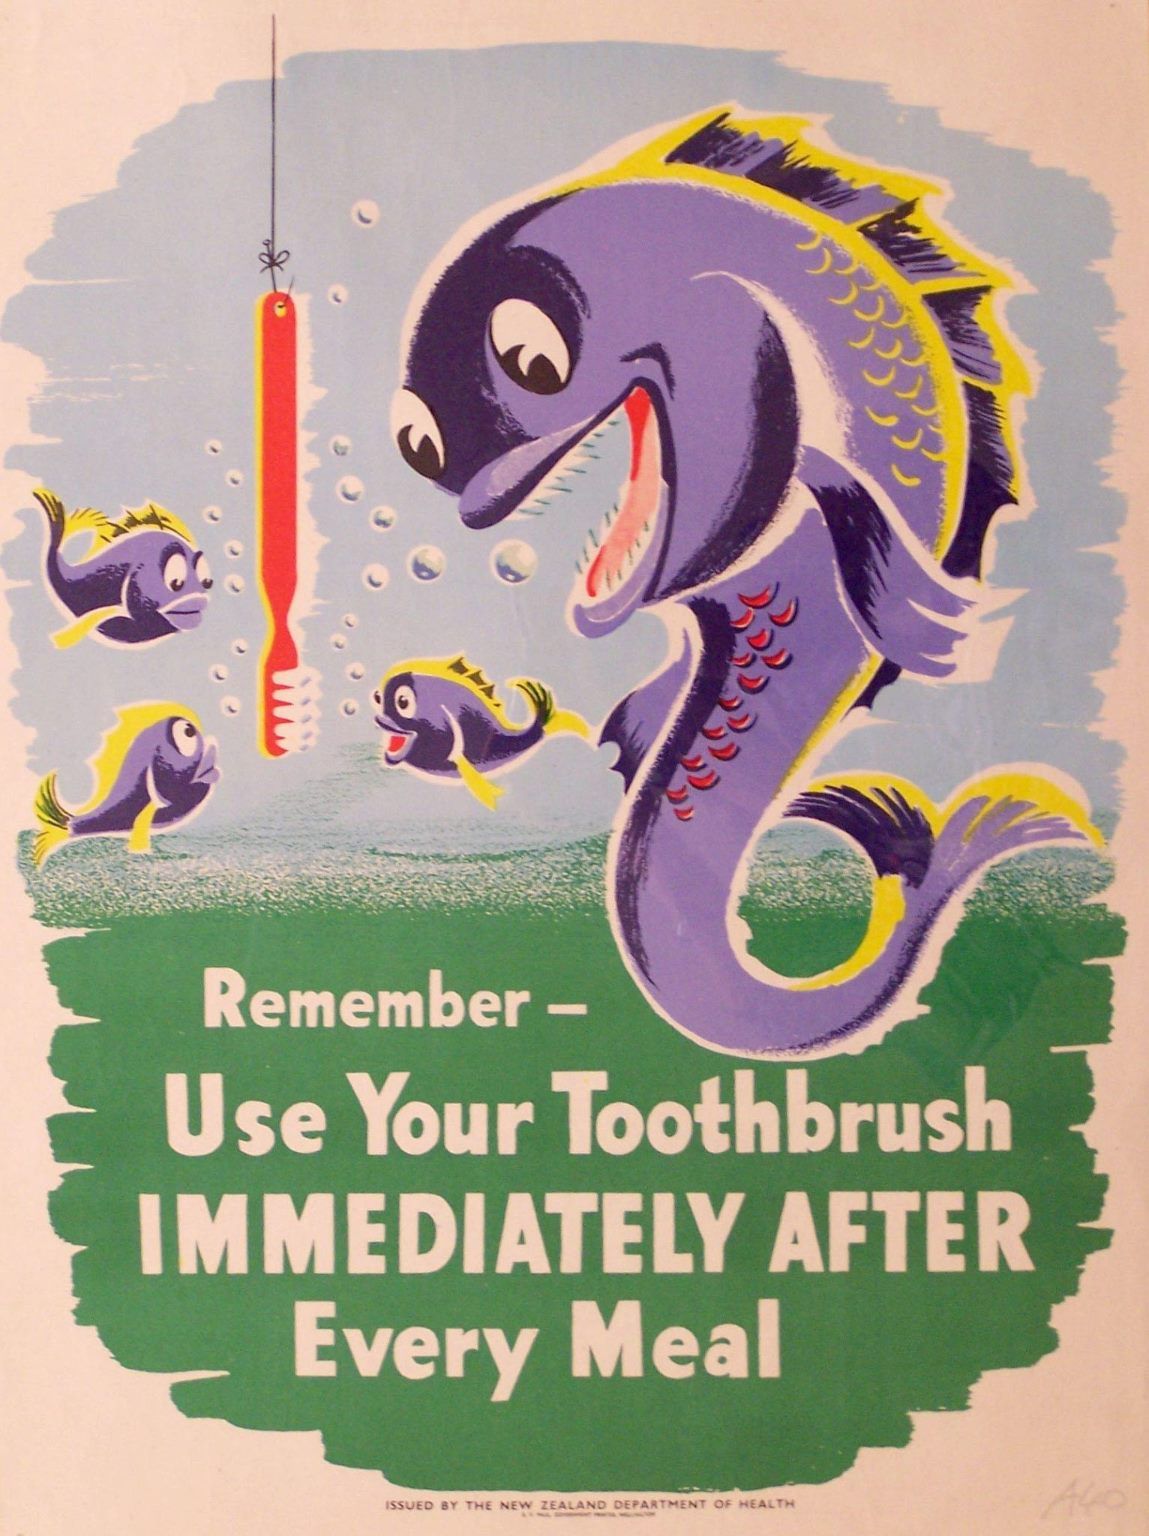 VINTAGE POSTER: New Zealand Department of Health / Use Your Toothbrush